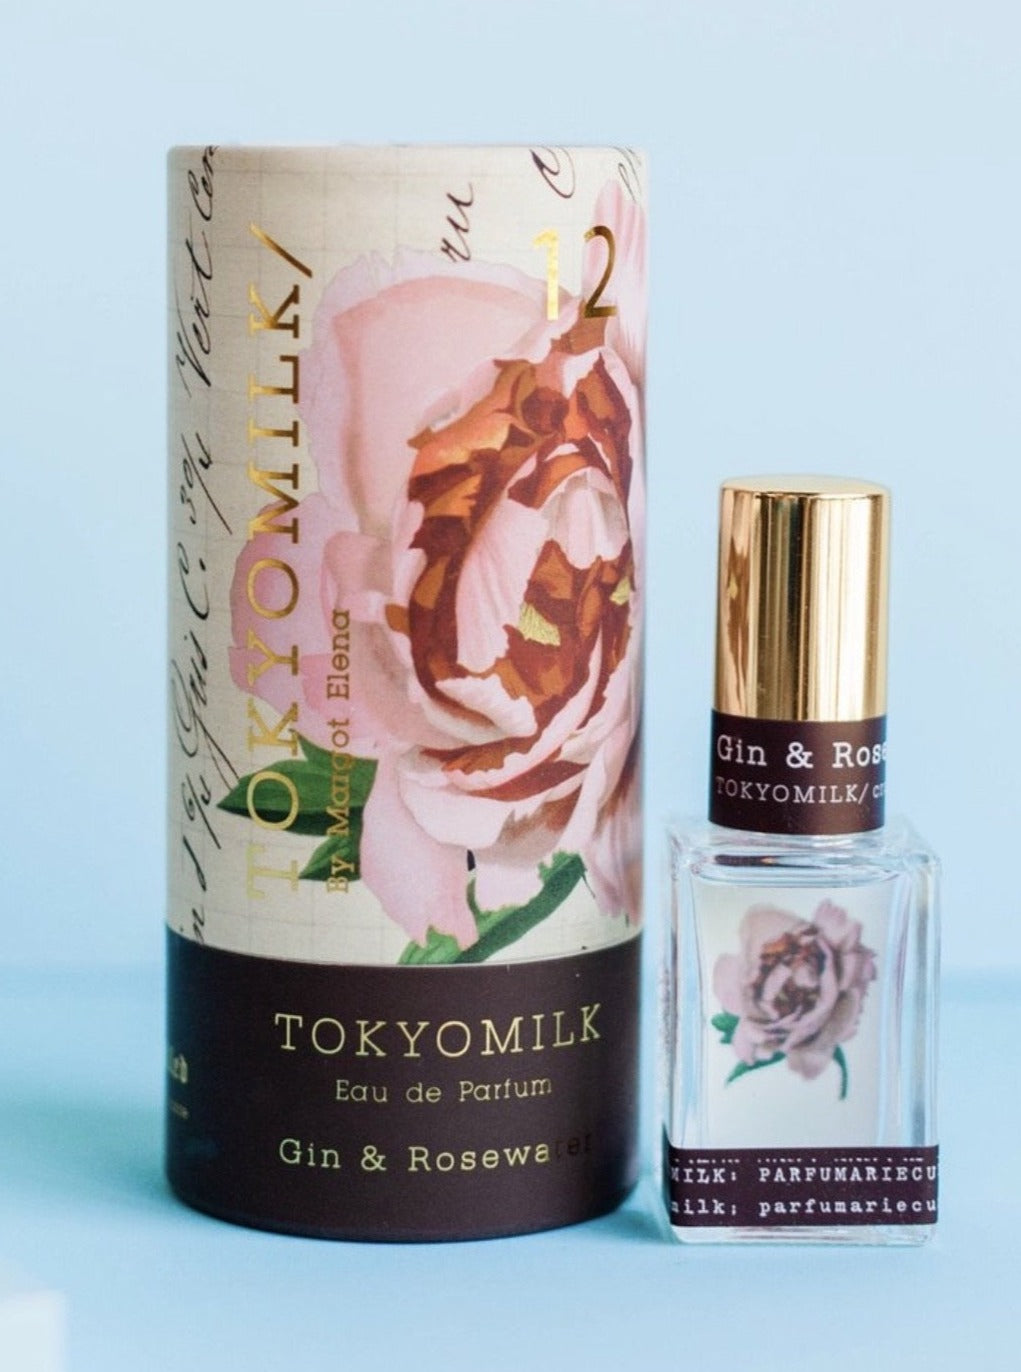 Gin and Rosewater perfume